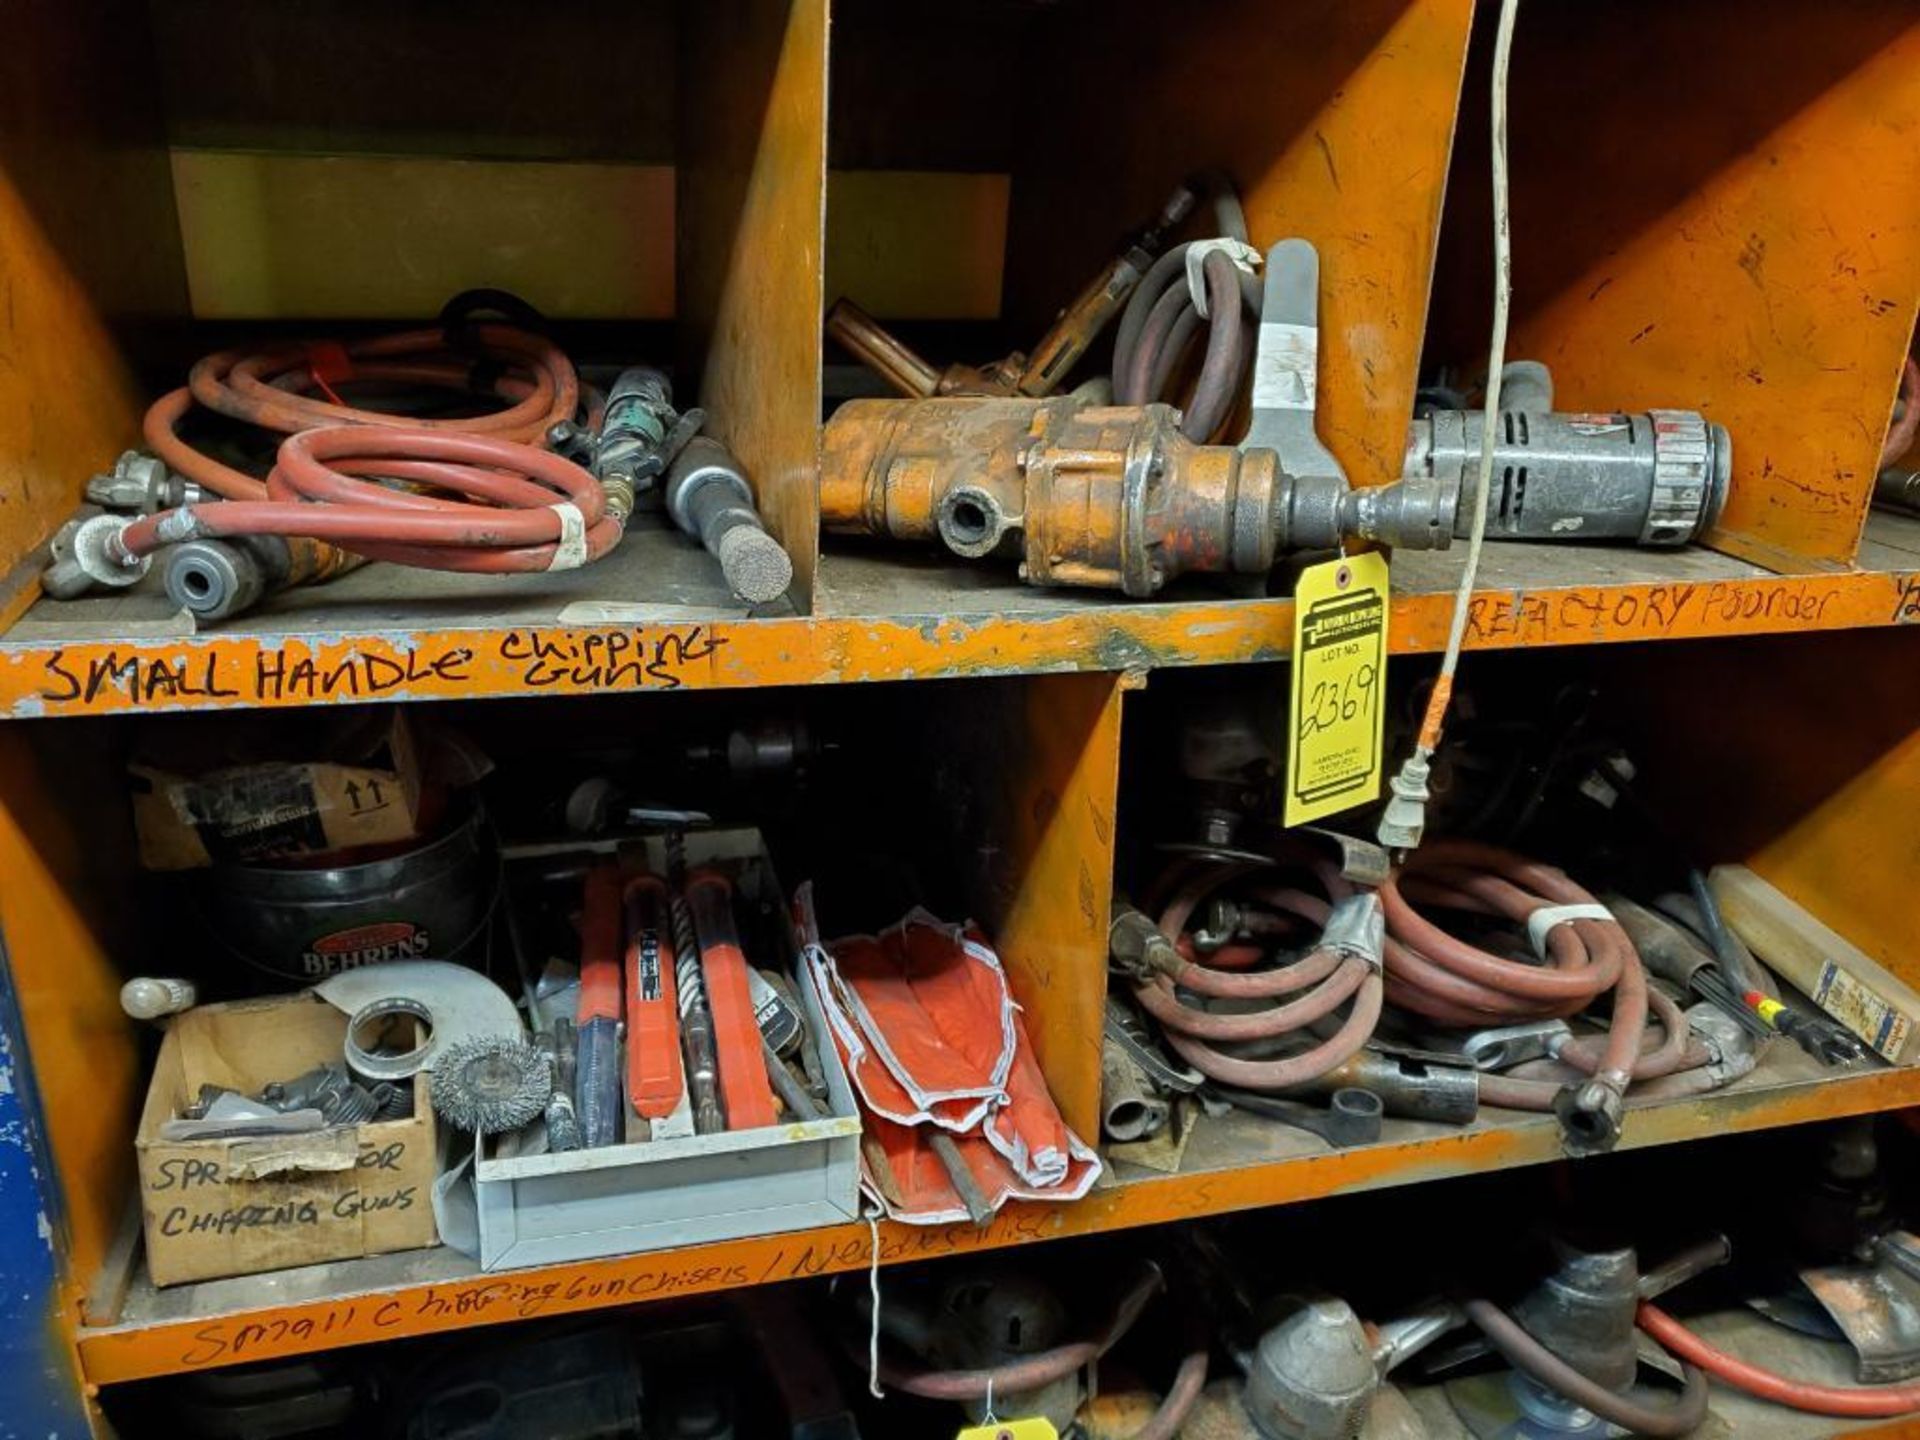 CONTENTS OF SHELVING UNIT, METABO GRINDERS, MILWAUKEE DEEP CUT BAND SAWS, PNEUMATIC METAL CUTTING SA - Image 10 of 18